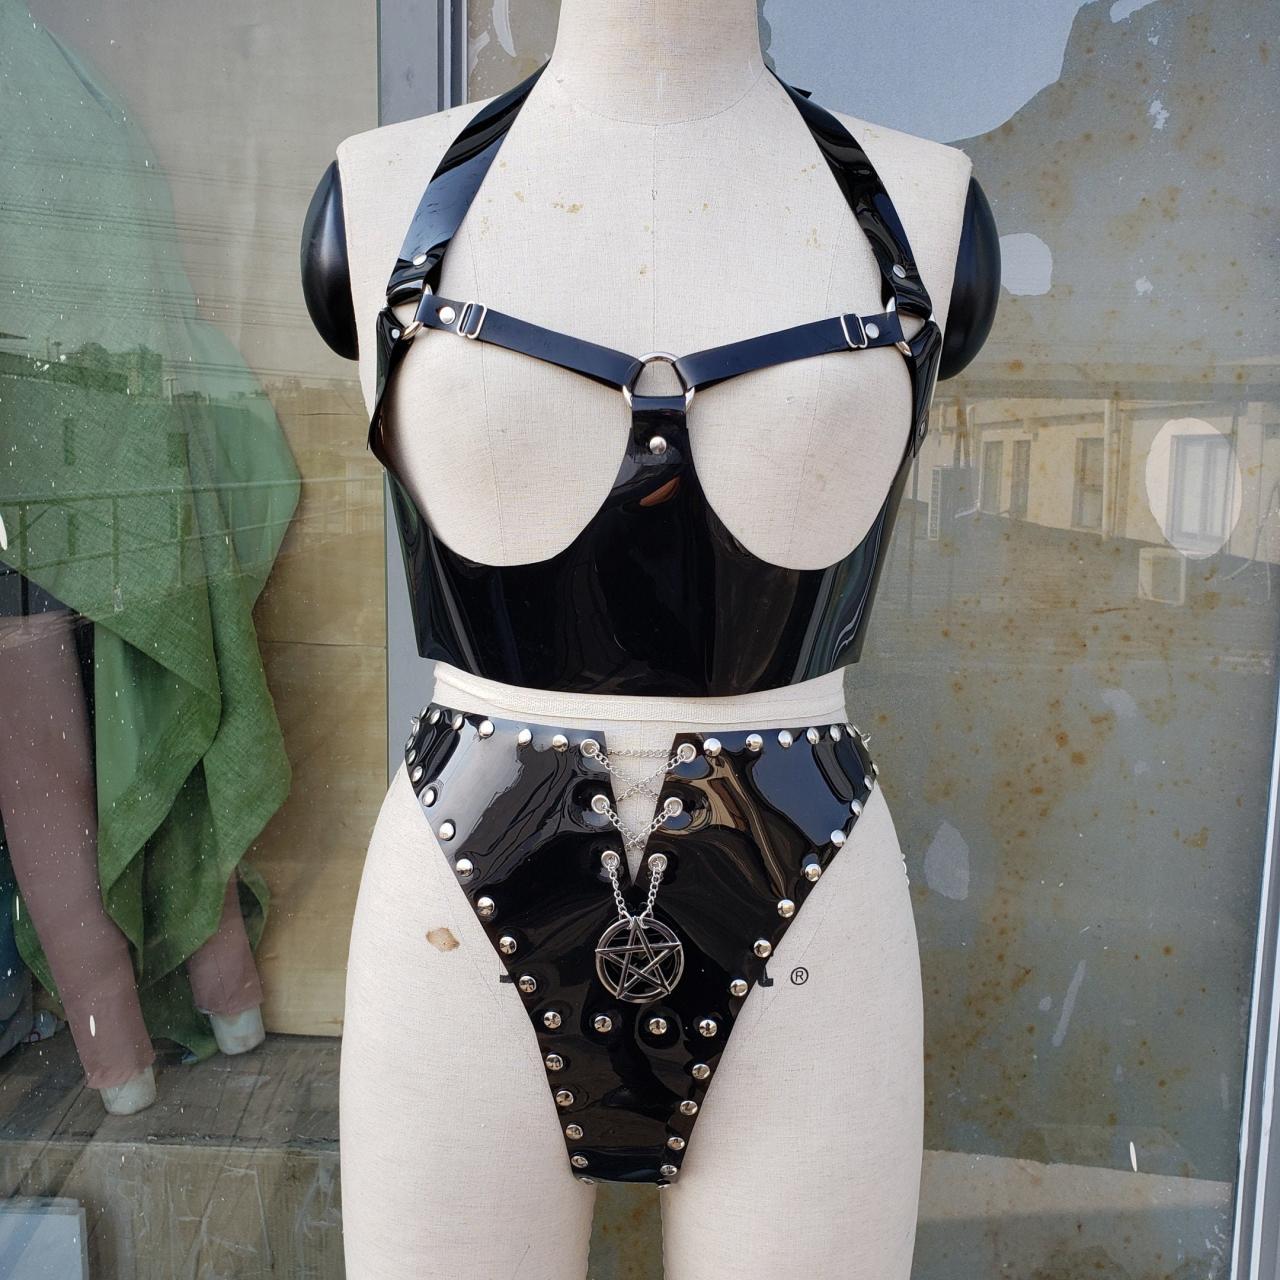 Chain Bra, Personalized BDSM Woman Gear, Fetish, Chainmail, ouver